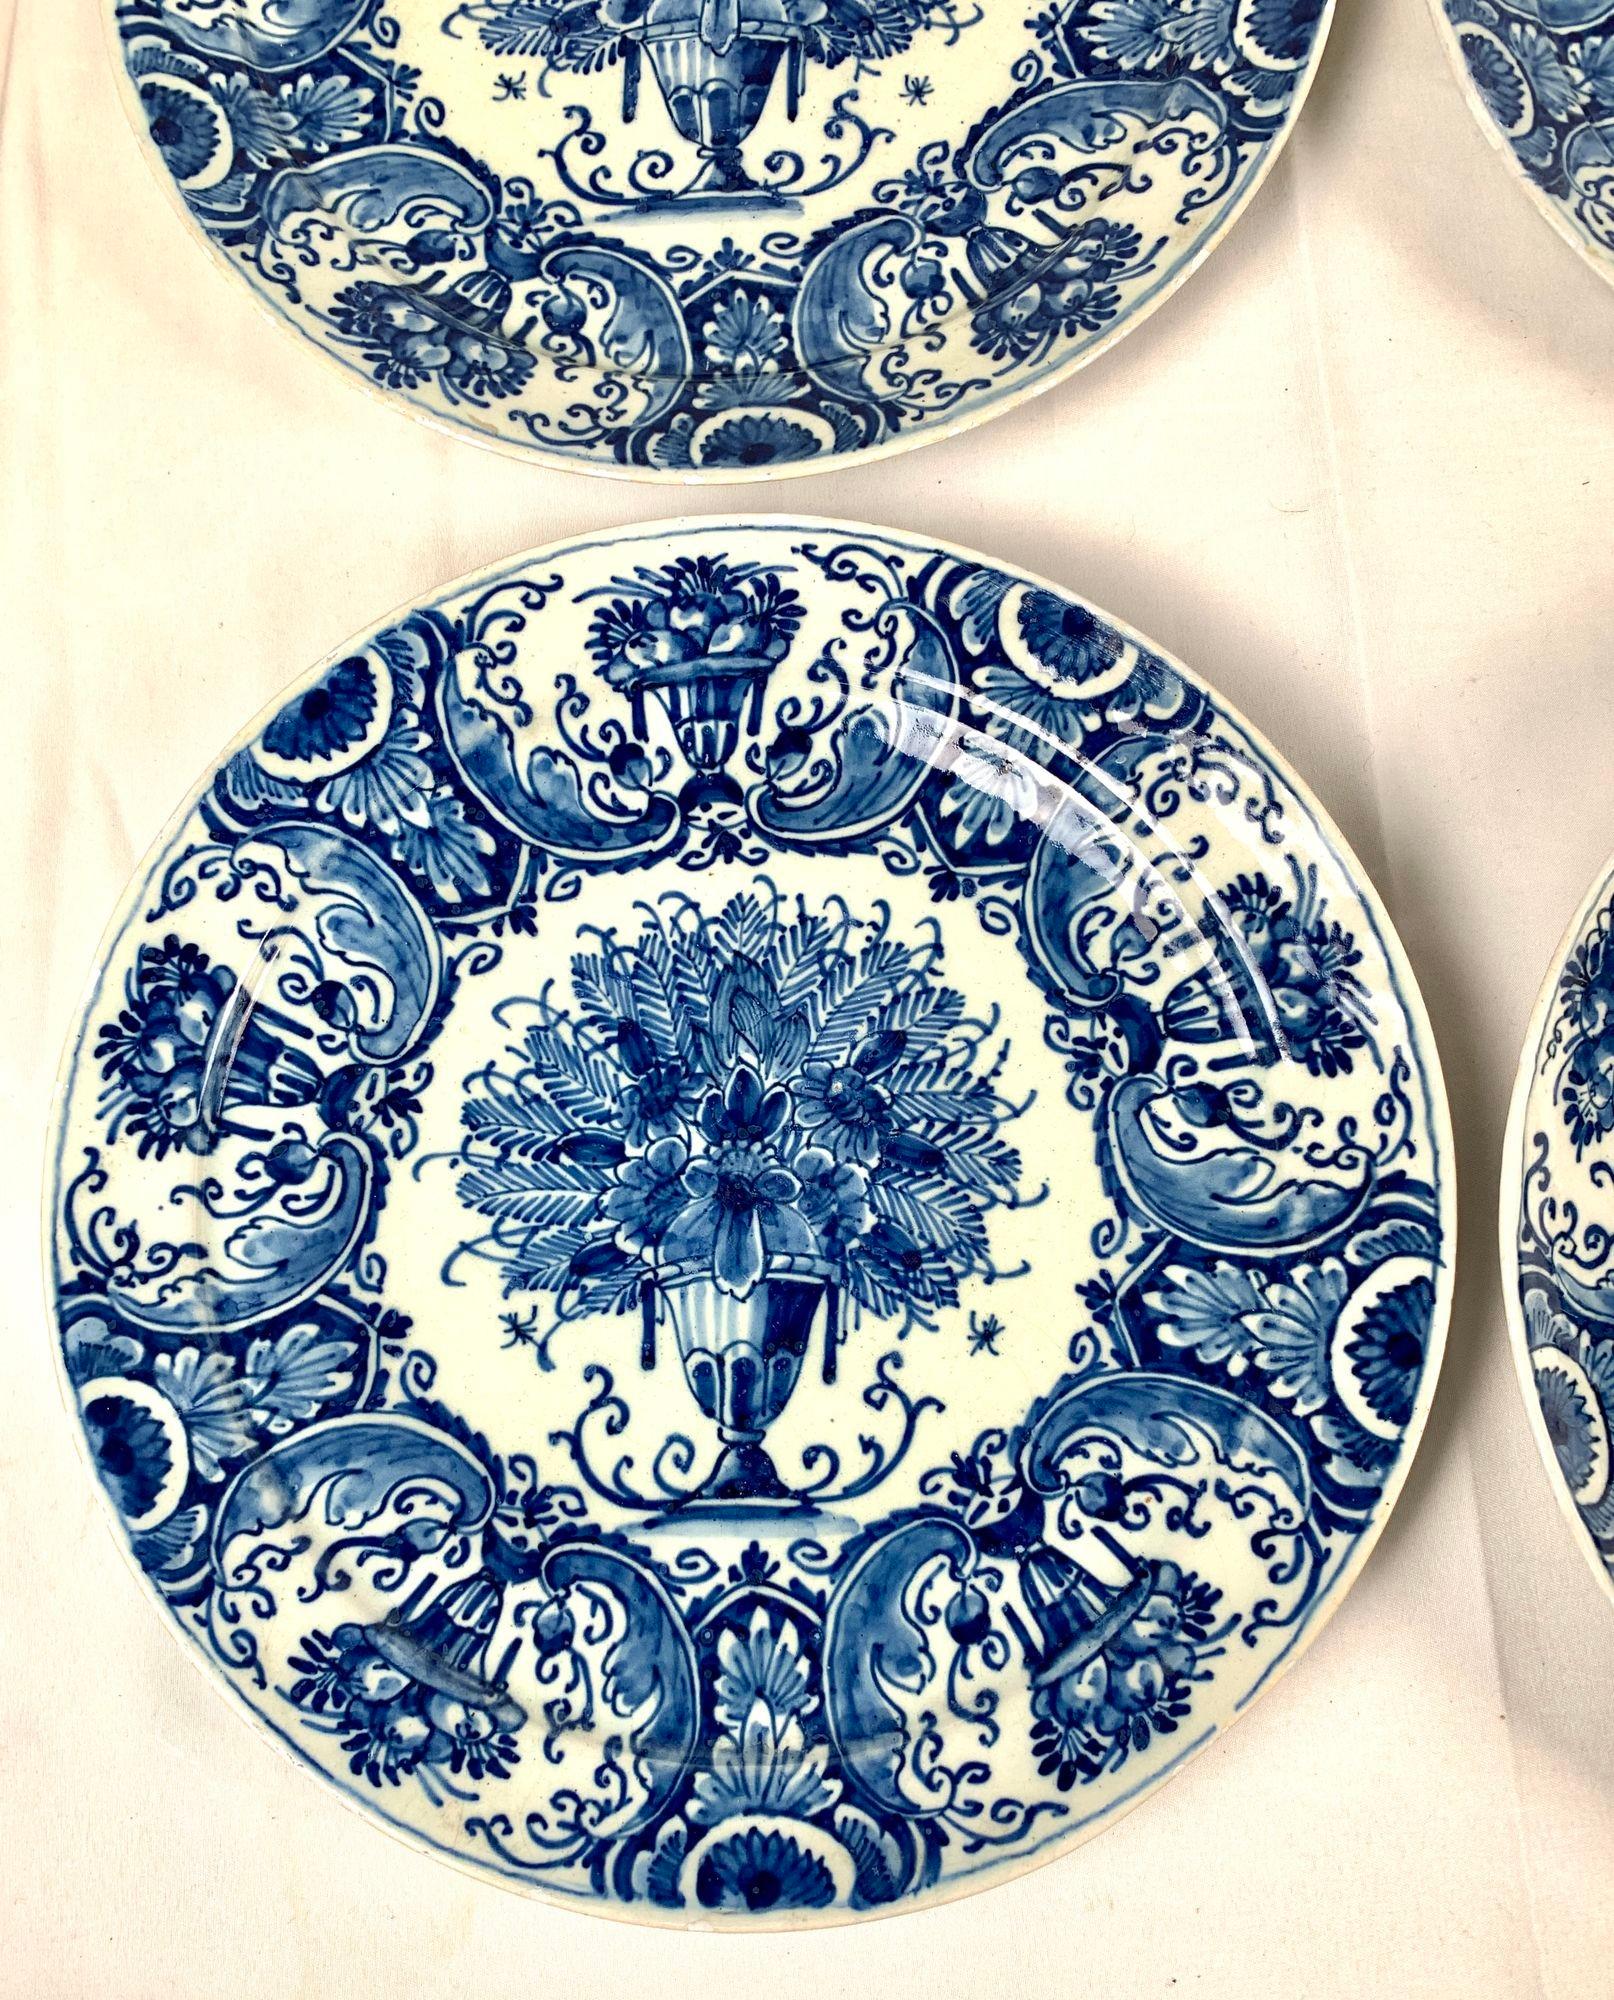 This set of four antique Delft blue and white plates was hand painted in the Netherlands circa 1760-1770.
The size of the plates is rare, somewhat larger than the more common 9